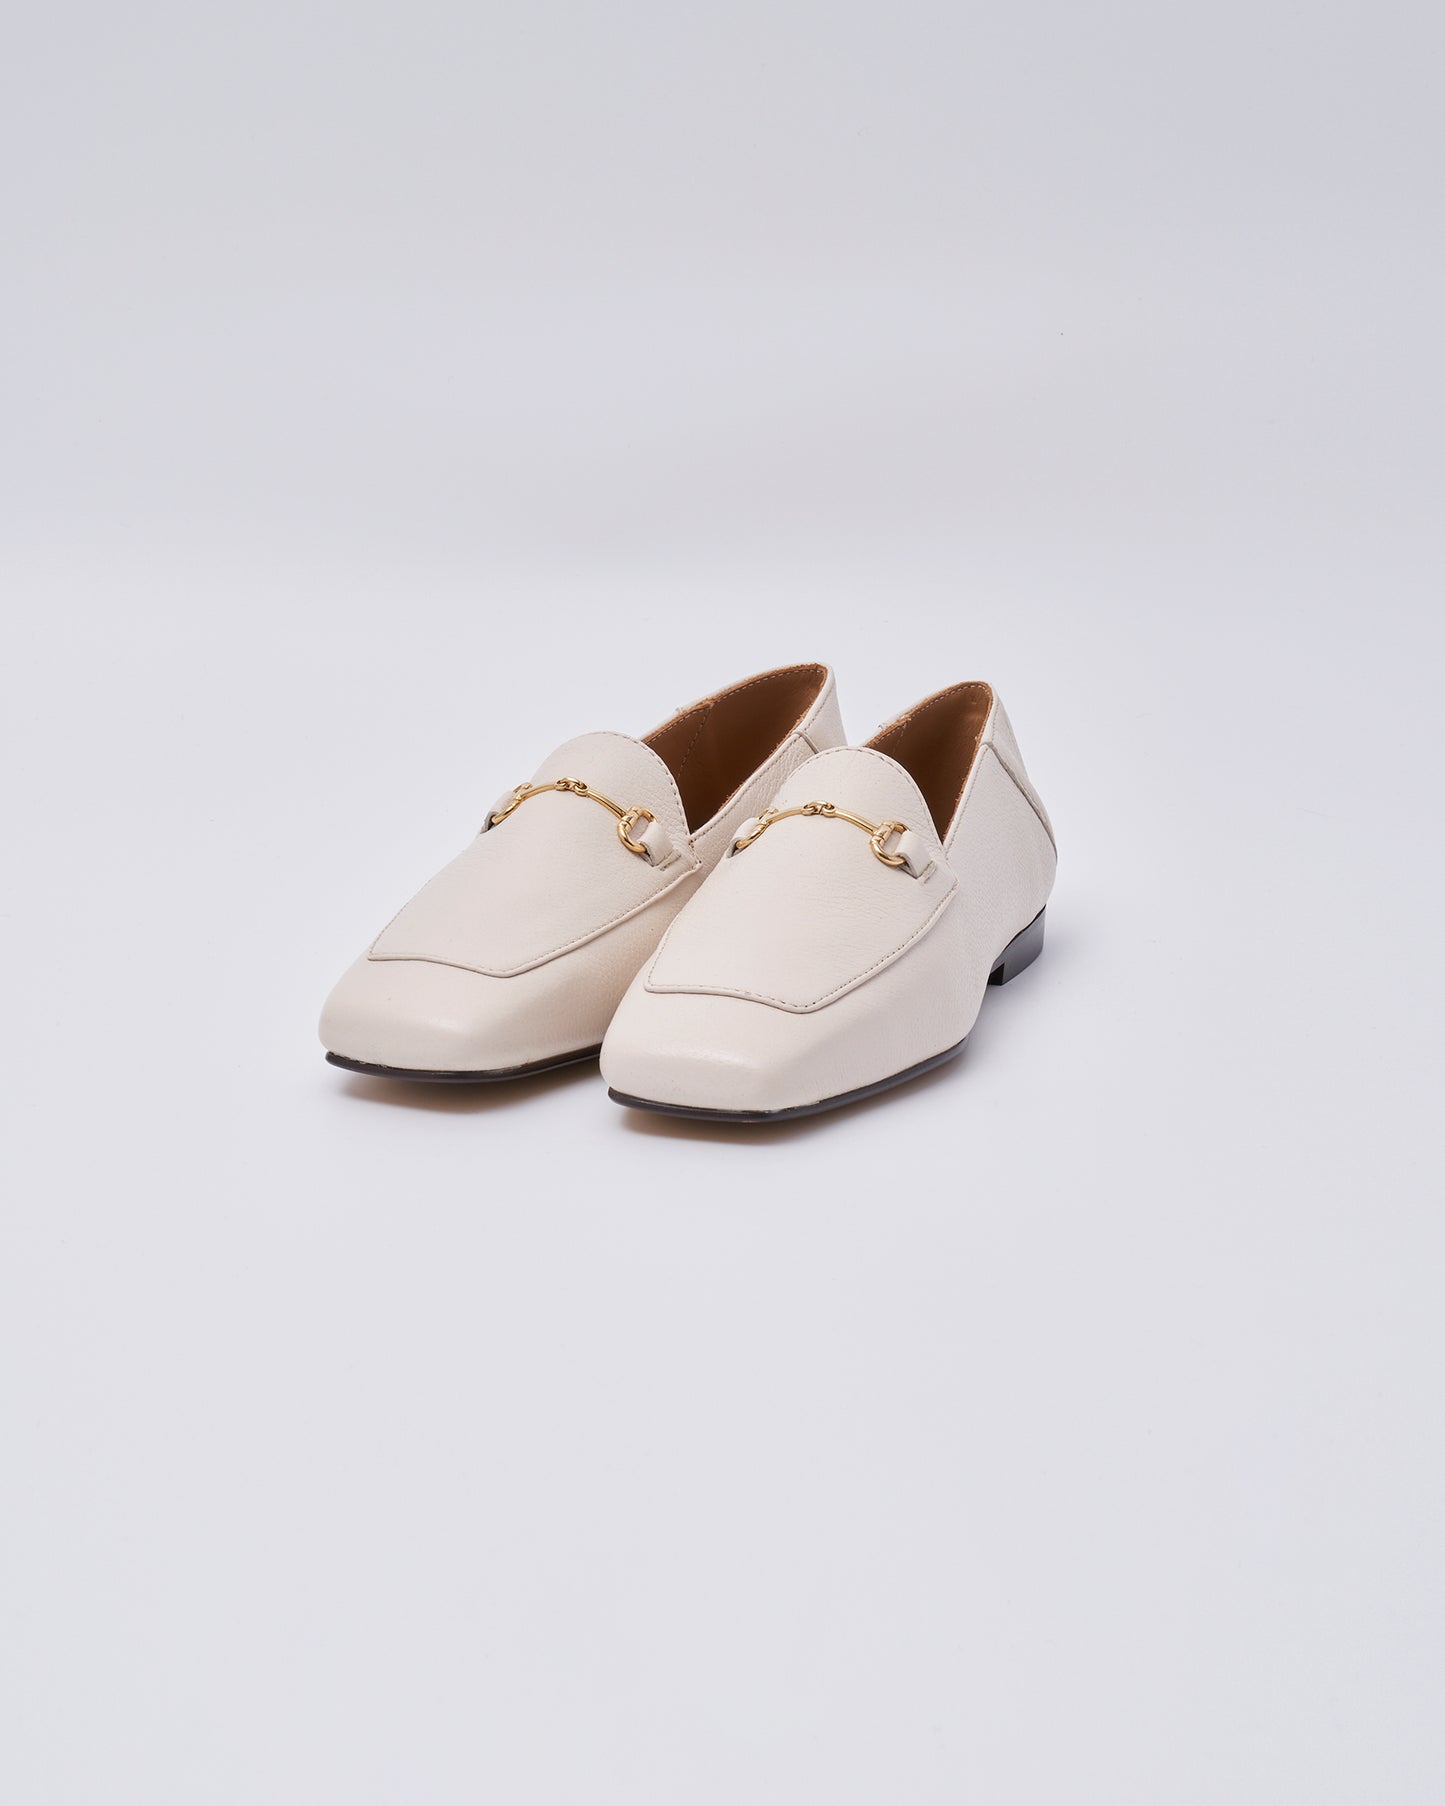 22121W BIT SLIP ON SHOES SQUARE SHOES GRAIN LEATHER WHITE